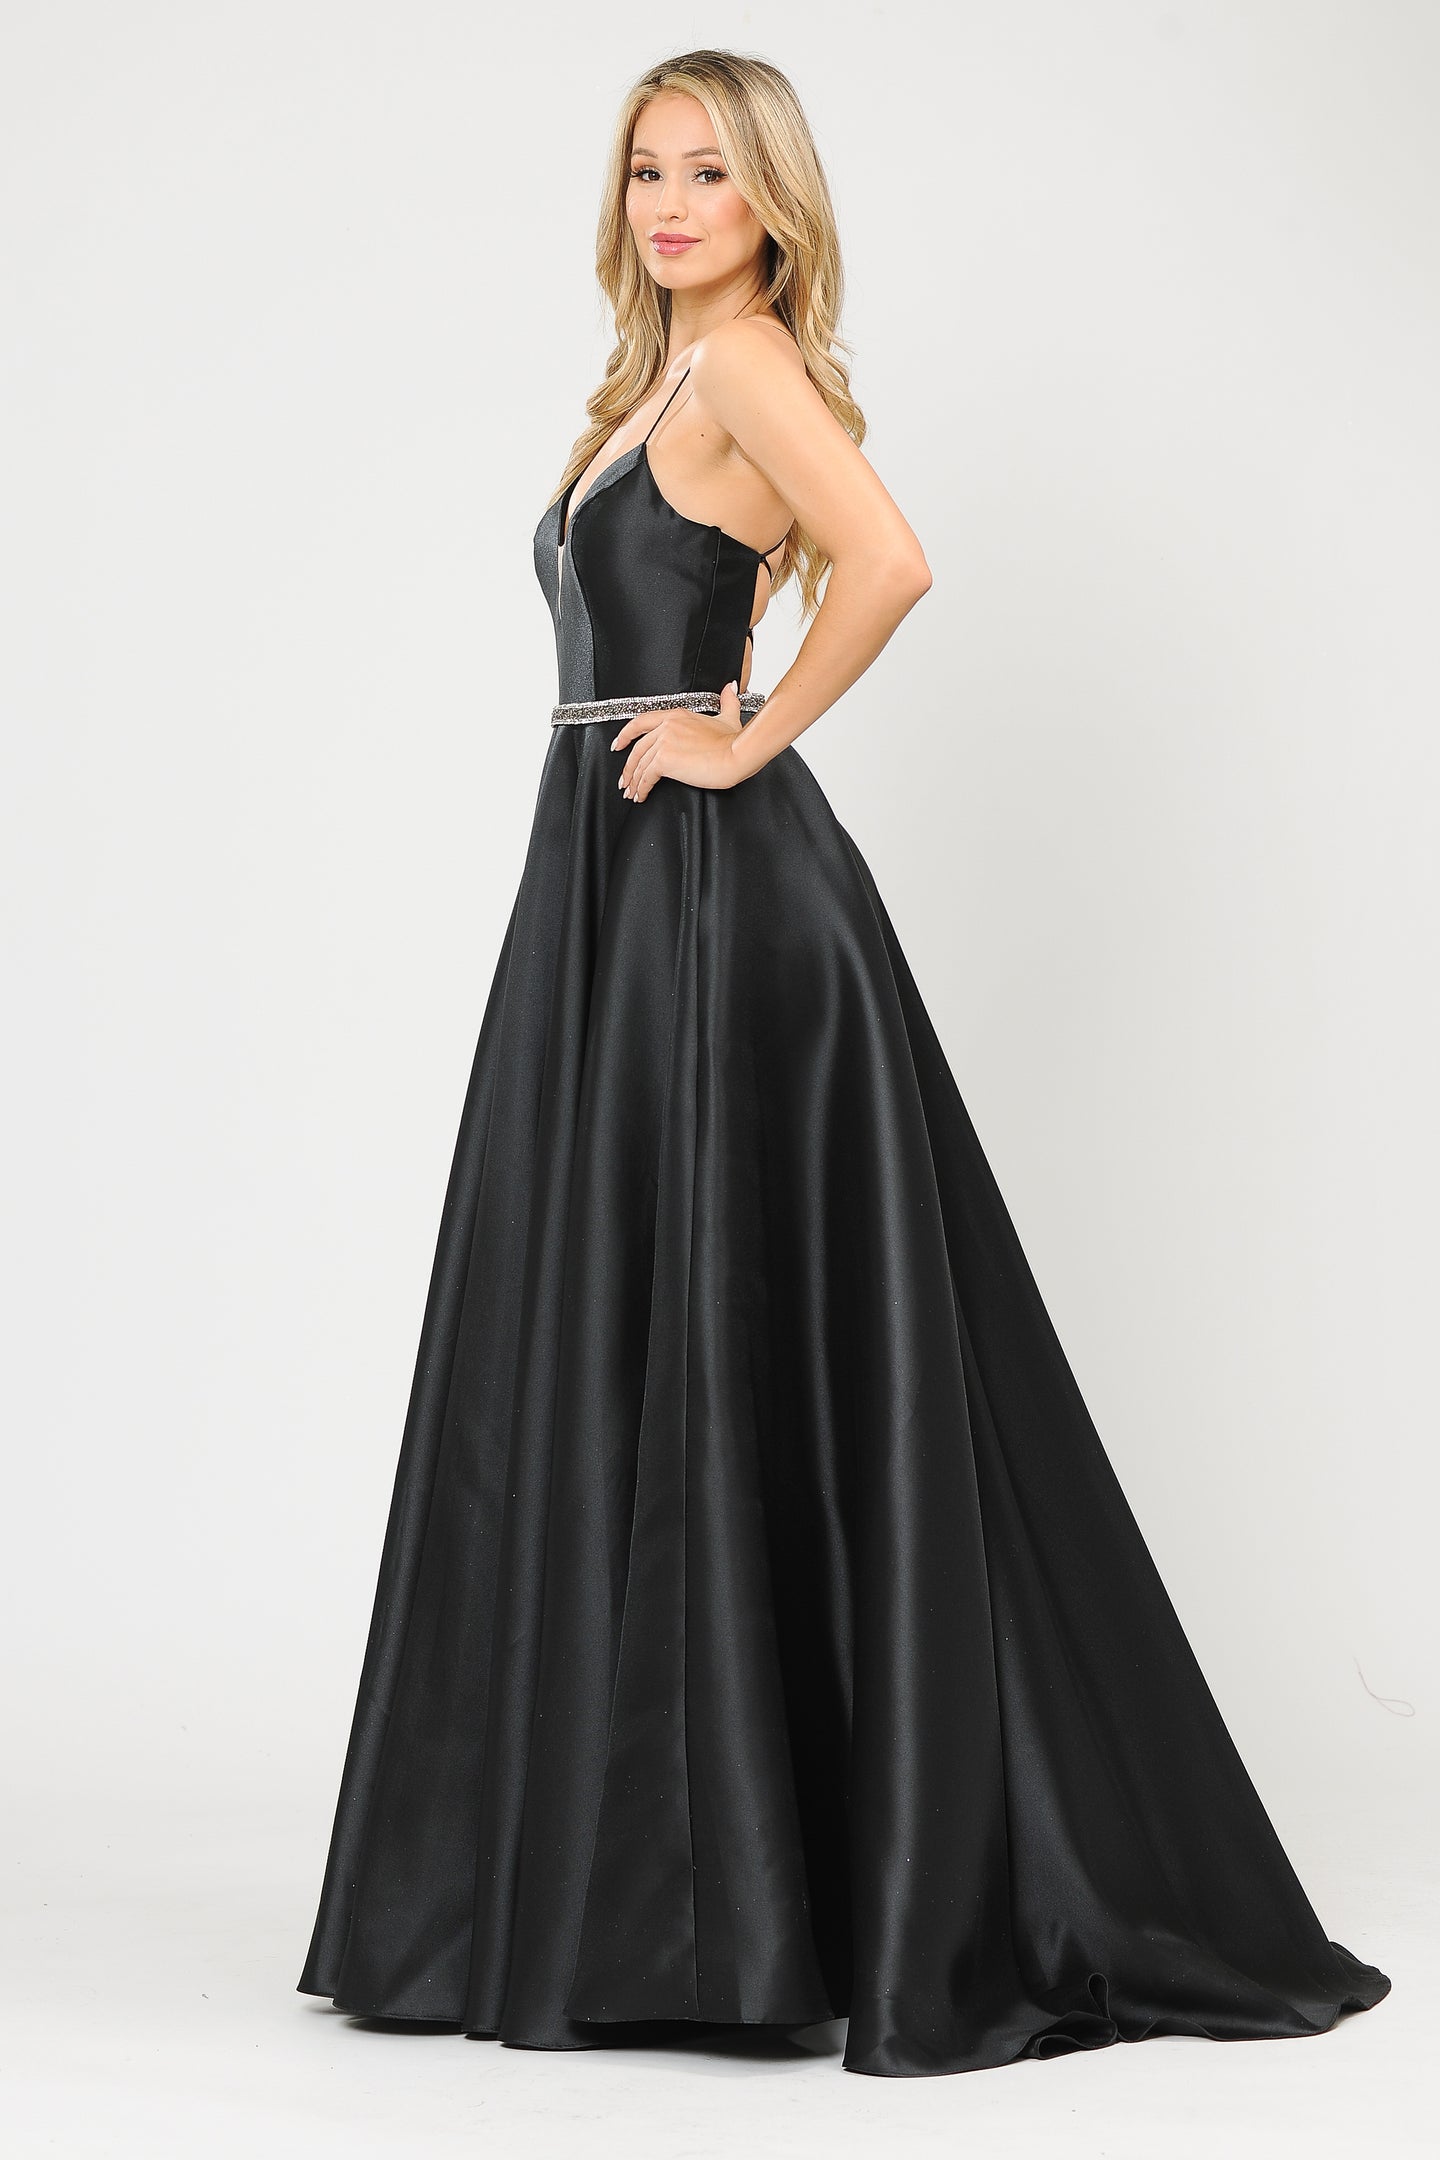 La Merchandise LAY8688 Simple Mikado Sexy Open Back A-Line Prom Gown